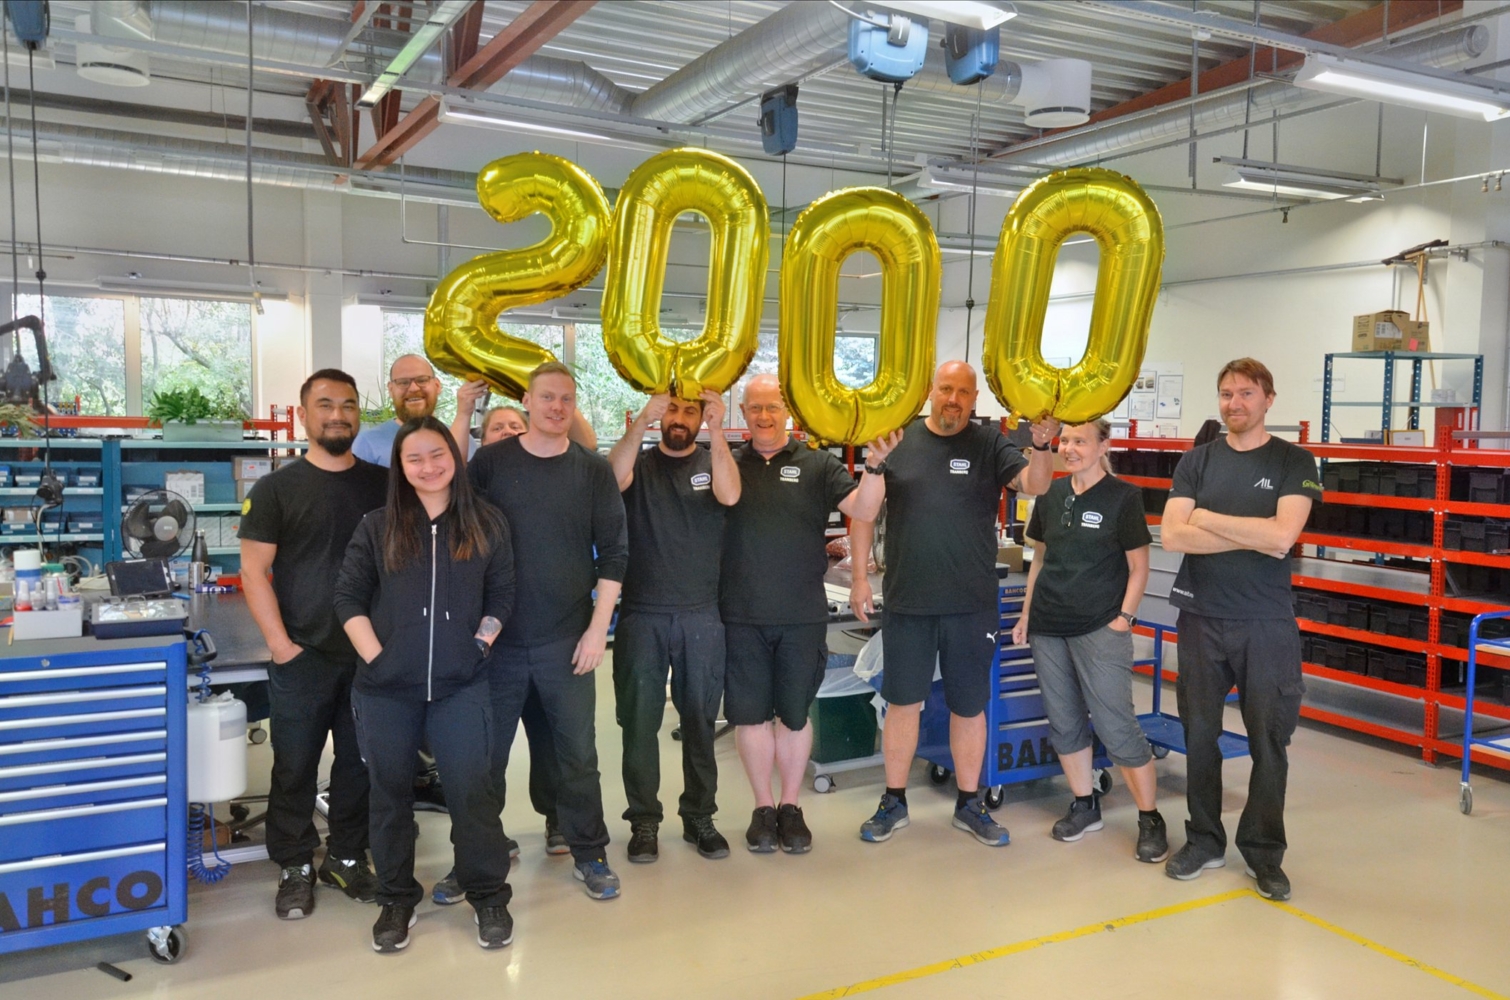 Employees in the production team at R. STAHL Tranberg celebrating 2000 followers on LinkedIn